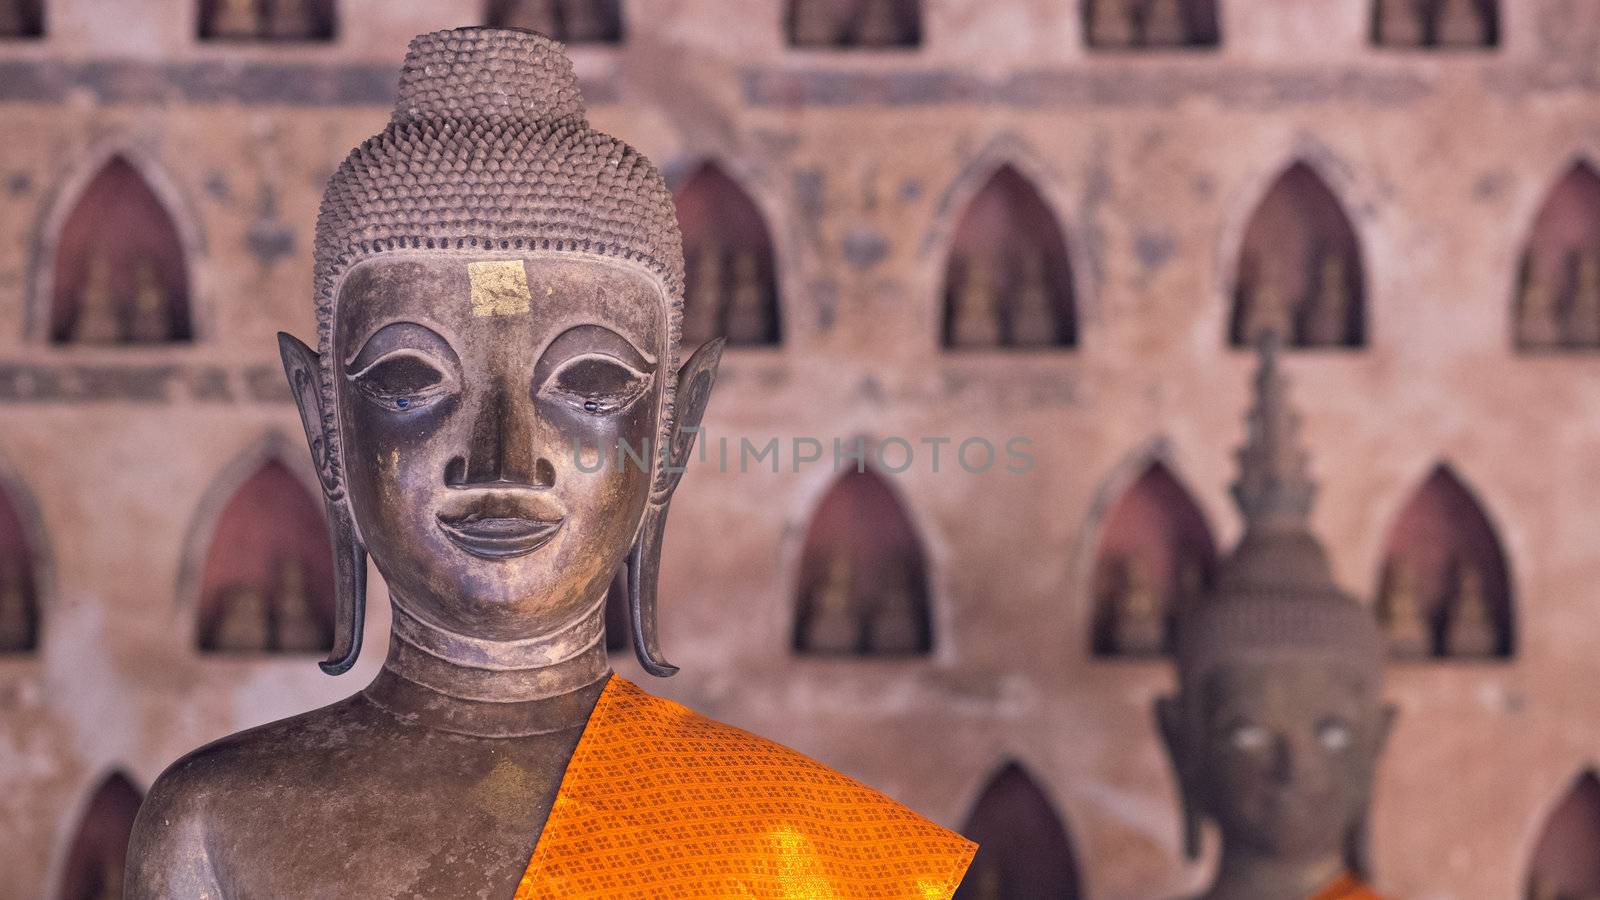 Buddha Image at Wat Si Saket in Vientiane, Laos. This temple contains 6,840 Buddha images of gold, silver and bronze, many placed in niches on the wall like in the background of this photo. Shallow depth of field with the Buddha image in the foreground in focus.